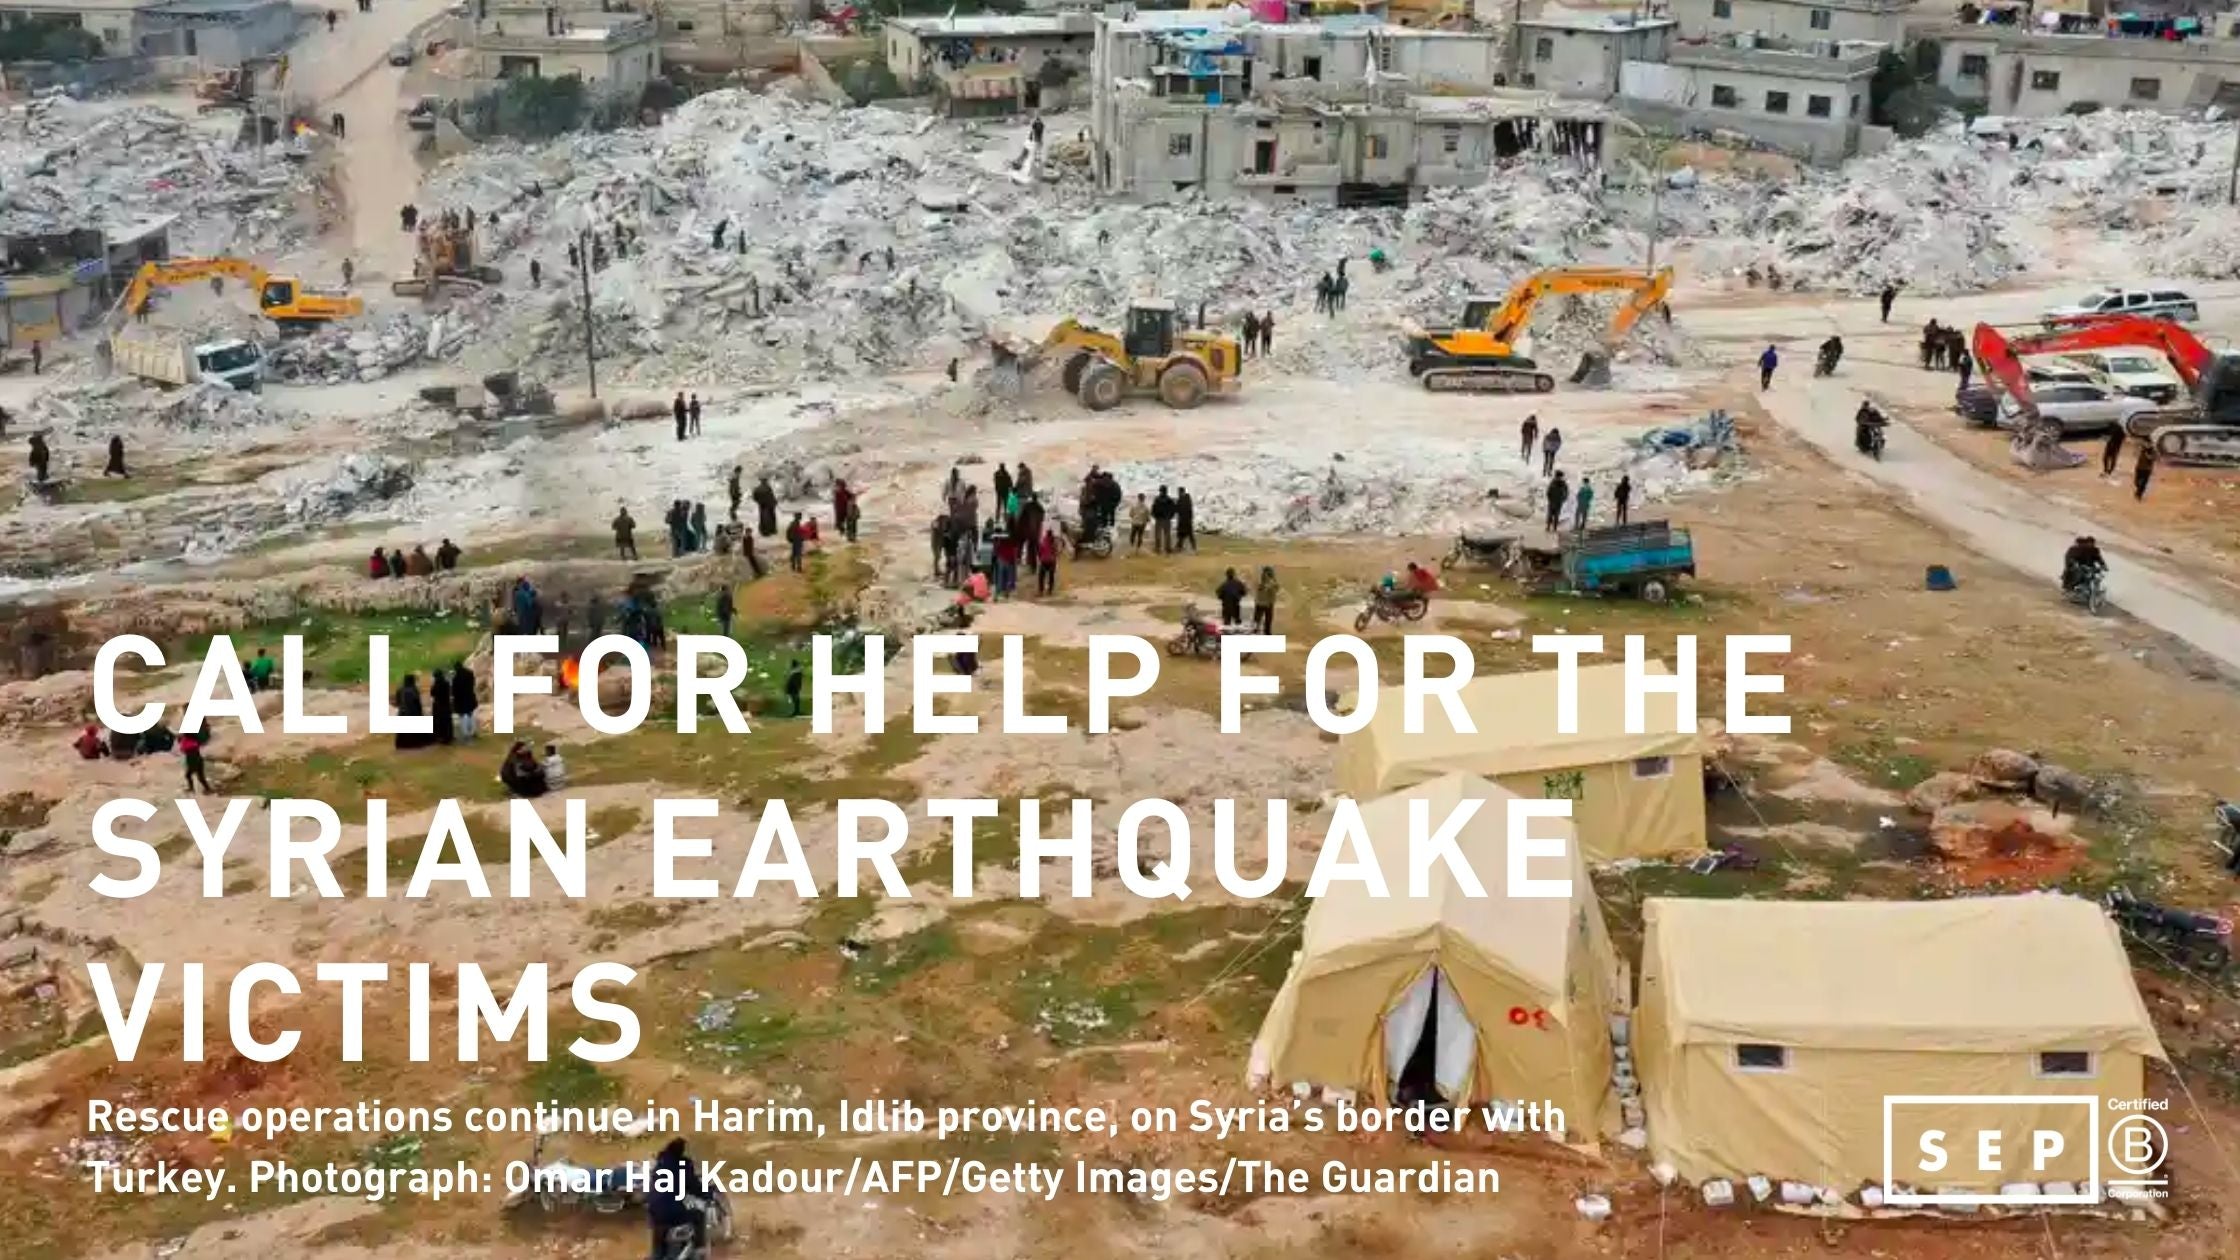 CALL FOR HELP FOR THE SYRIAN EARTHQUAKE VICTIMS